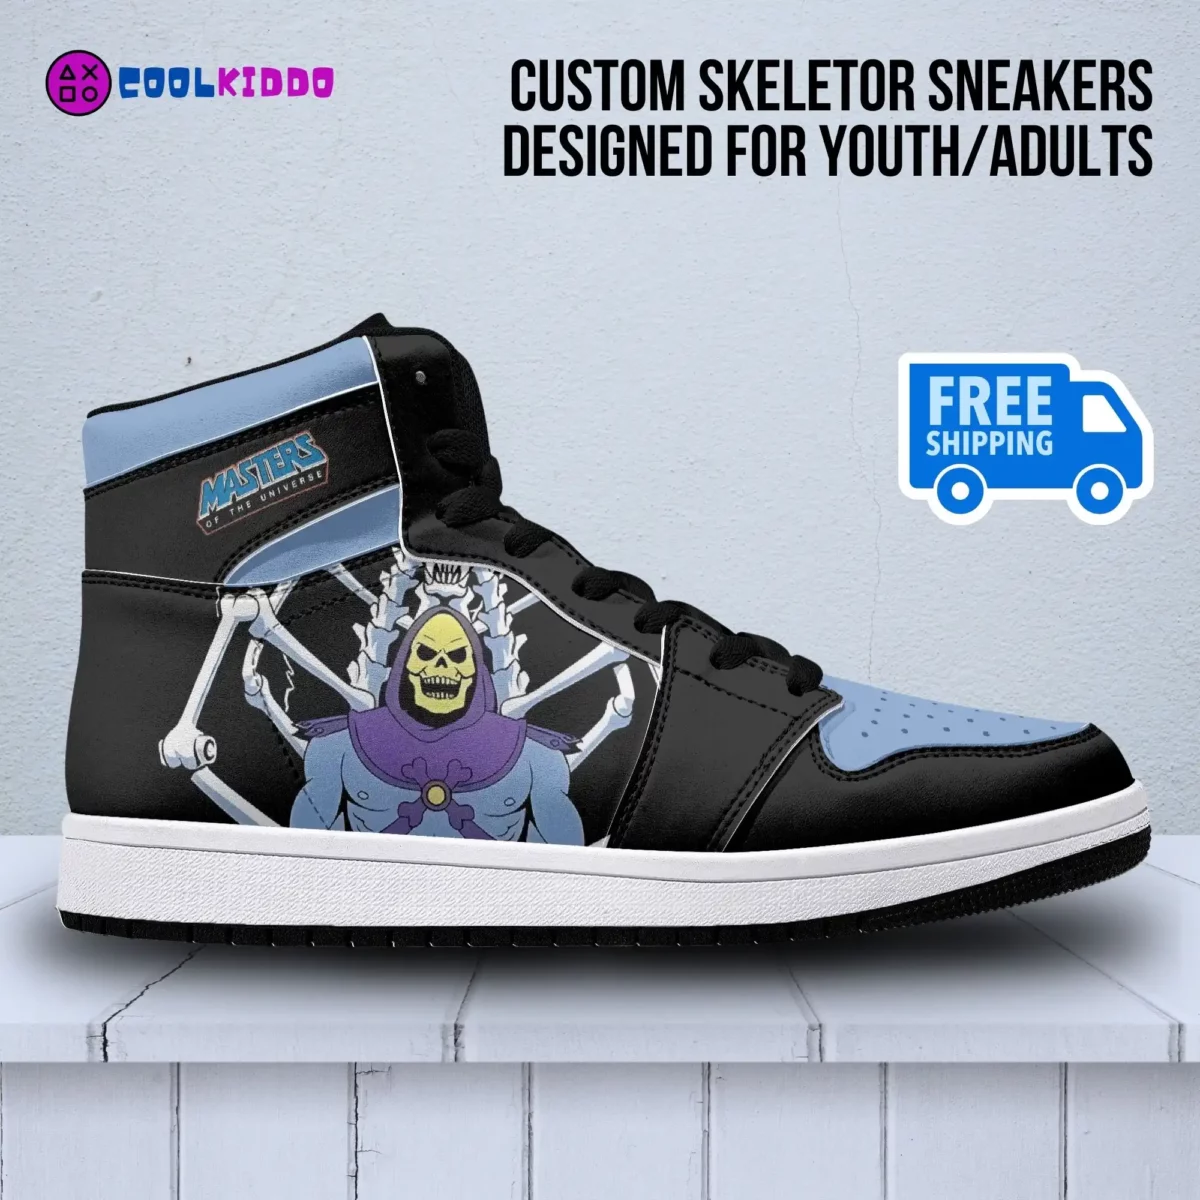 Custom Skeletor Masters of the Universe High-Top Adult/Youth Casual Sneakers Cool Kiddo 10